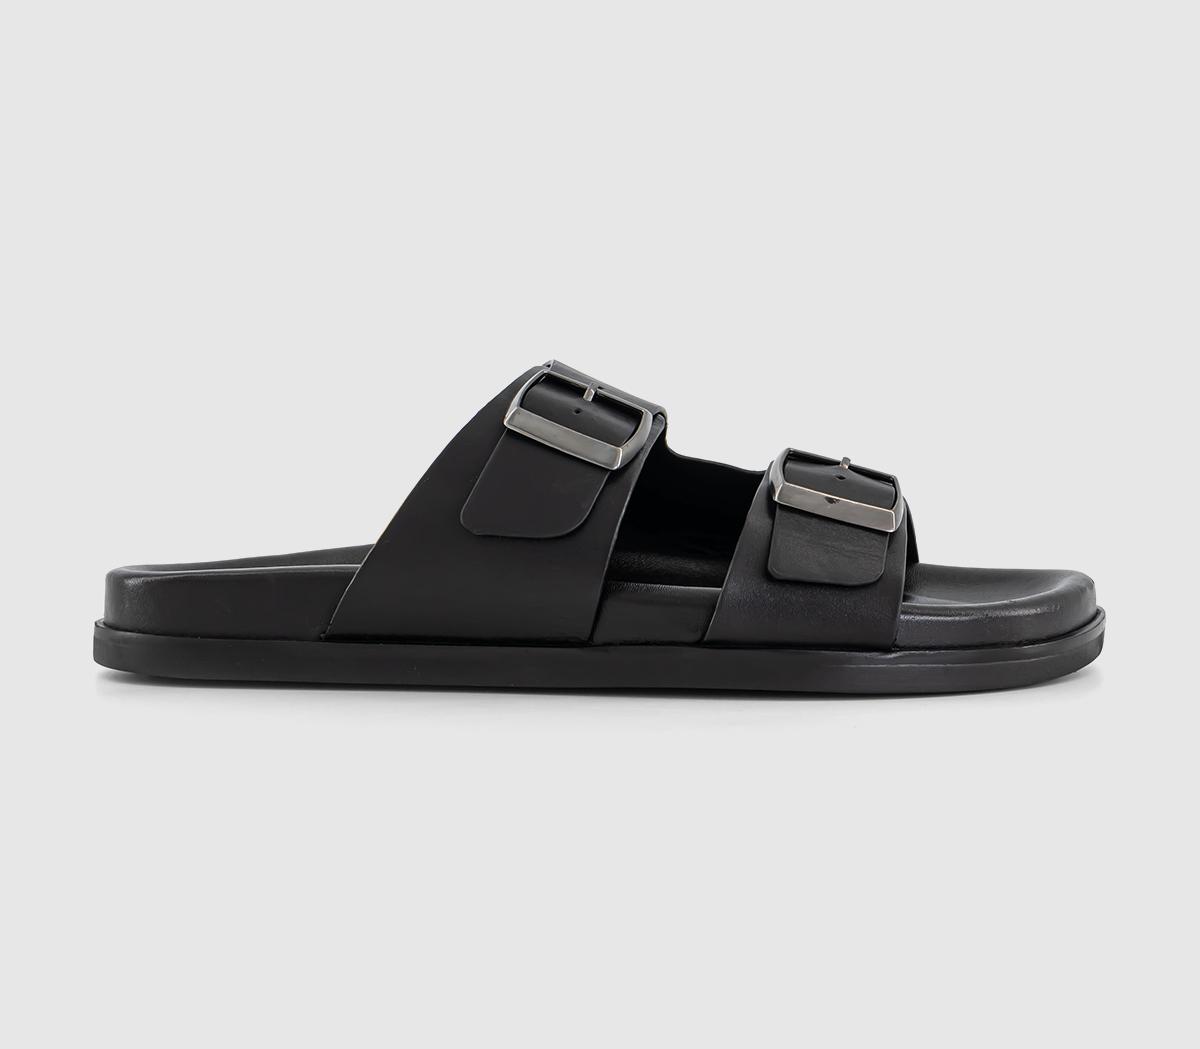 OFFICESaunders Double Buckle SandalsBlack Leather